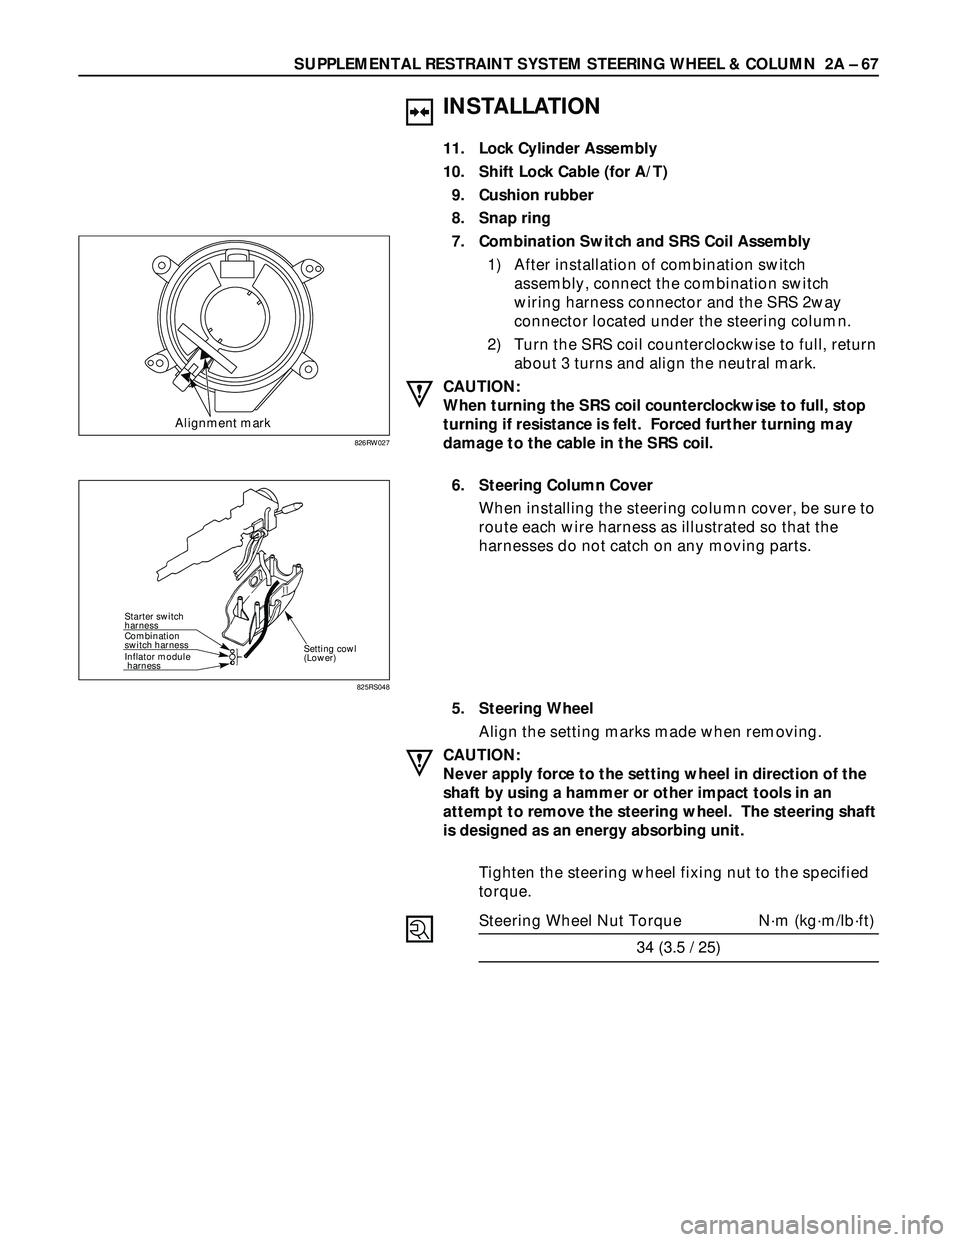 ISUZU TROOPER 1998  Service Repair Manual SUPPLEMENTAL RESTRAINT SYSTEM STEERING WHEEL & COLUMN  2A – 67
INSTALLATION
11. Lock Cylinder Assembly
10. Shift Lock Cable (for A/T)
9. Cushion rubber
8. Snap ring
7. Combination Switch and SRS Coi